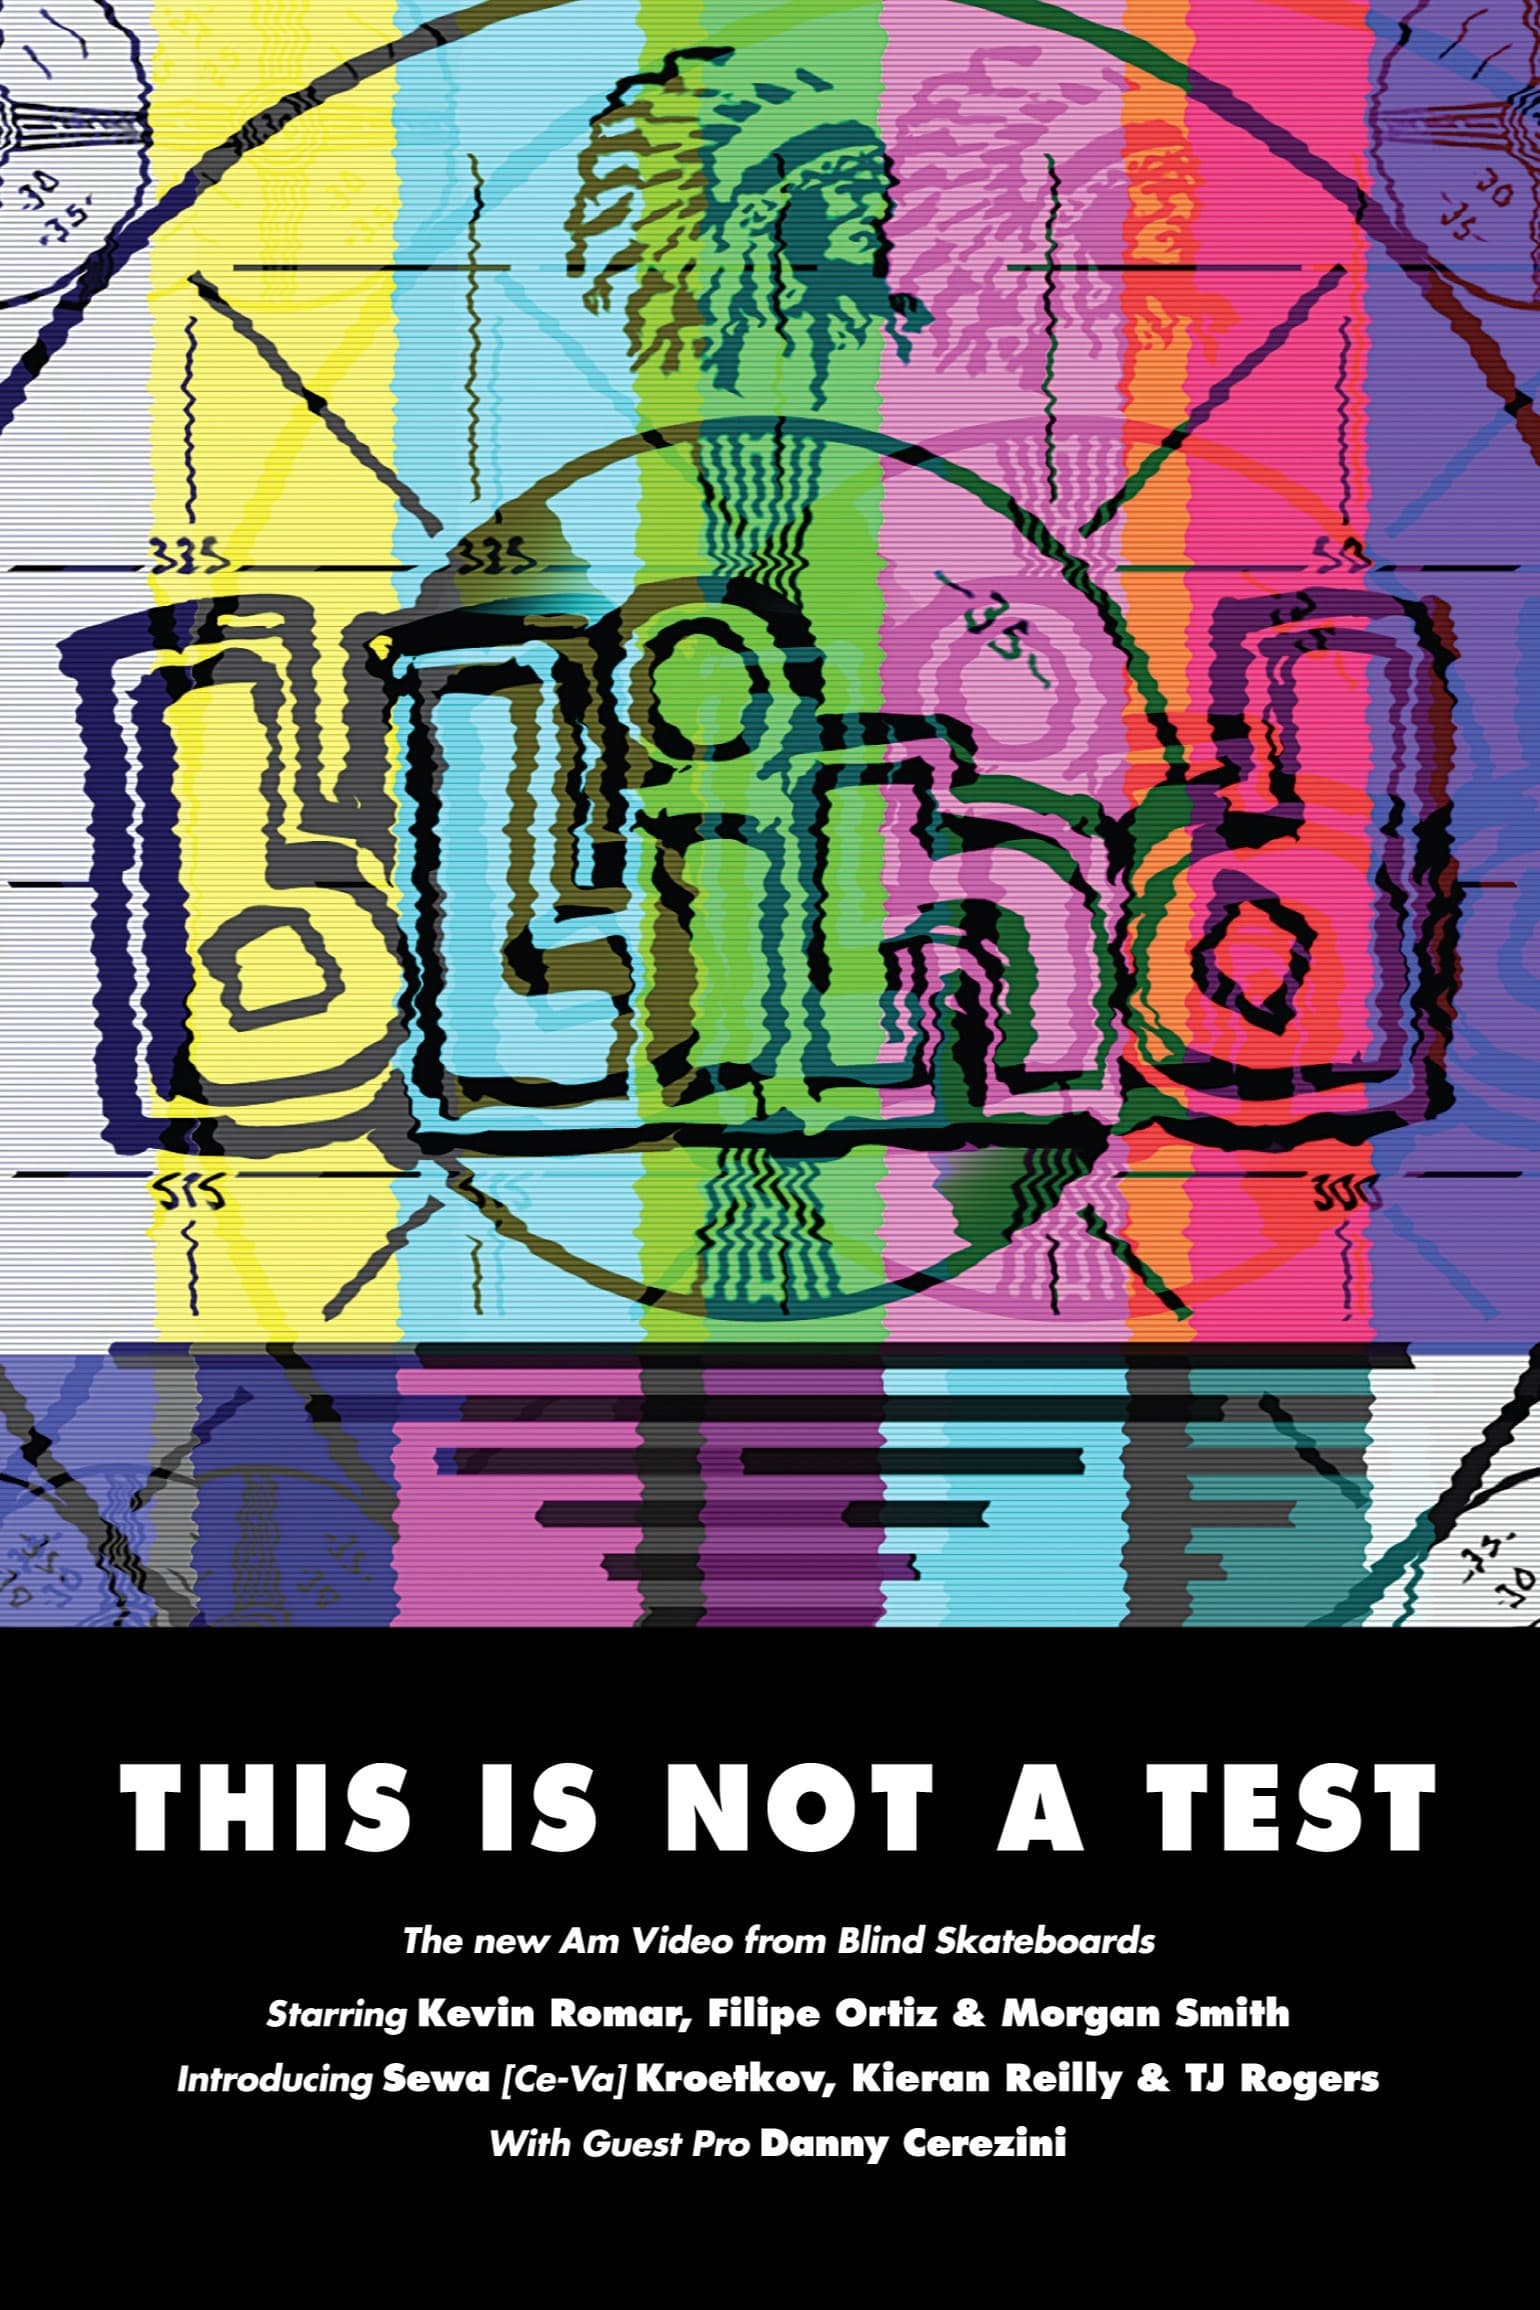 Blind - This Is Not a Test